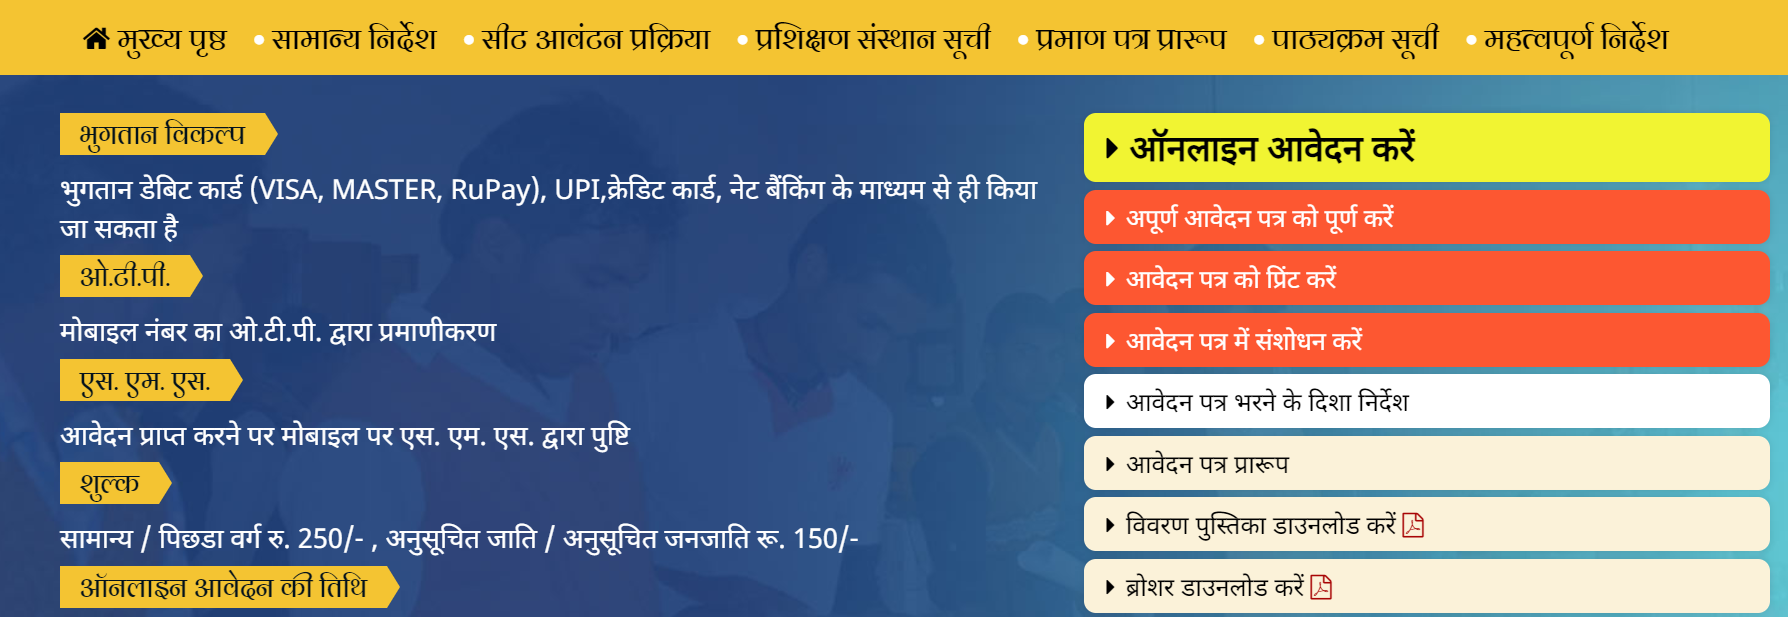 Up ITI Admission Online Form 2023 (Exam) Date - www.scvtup.in